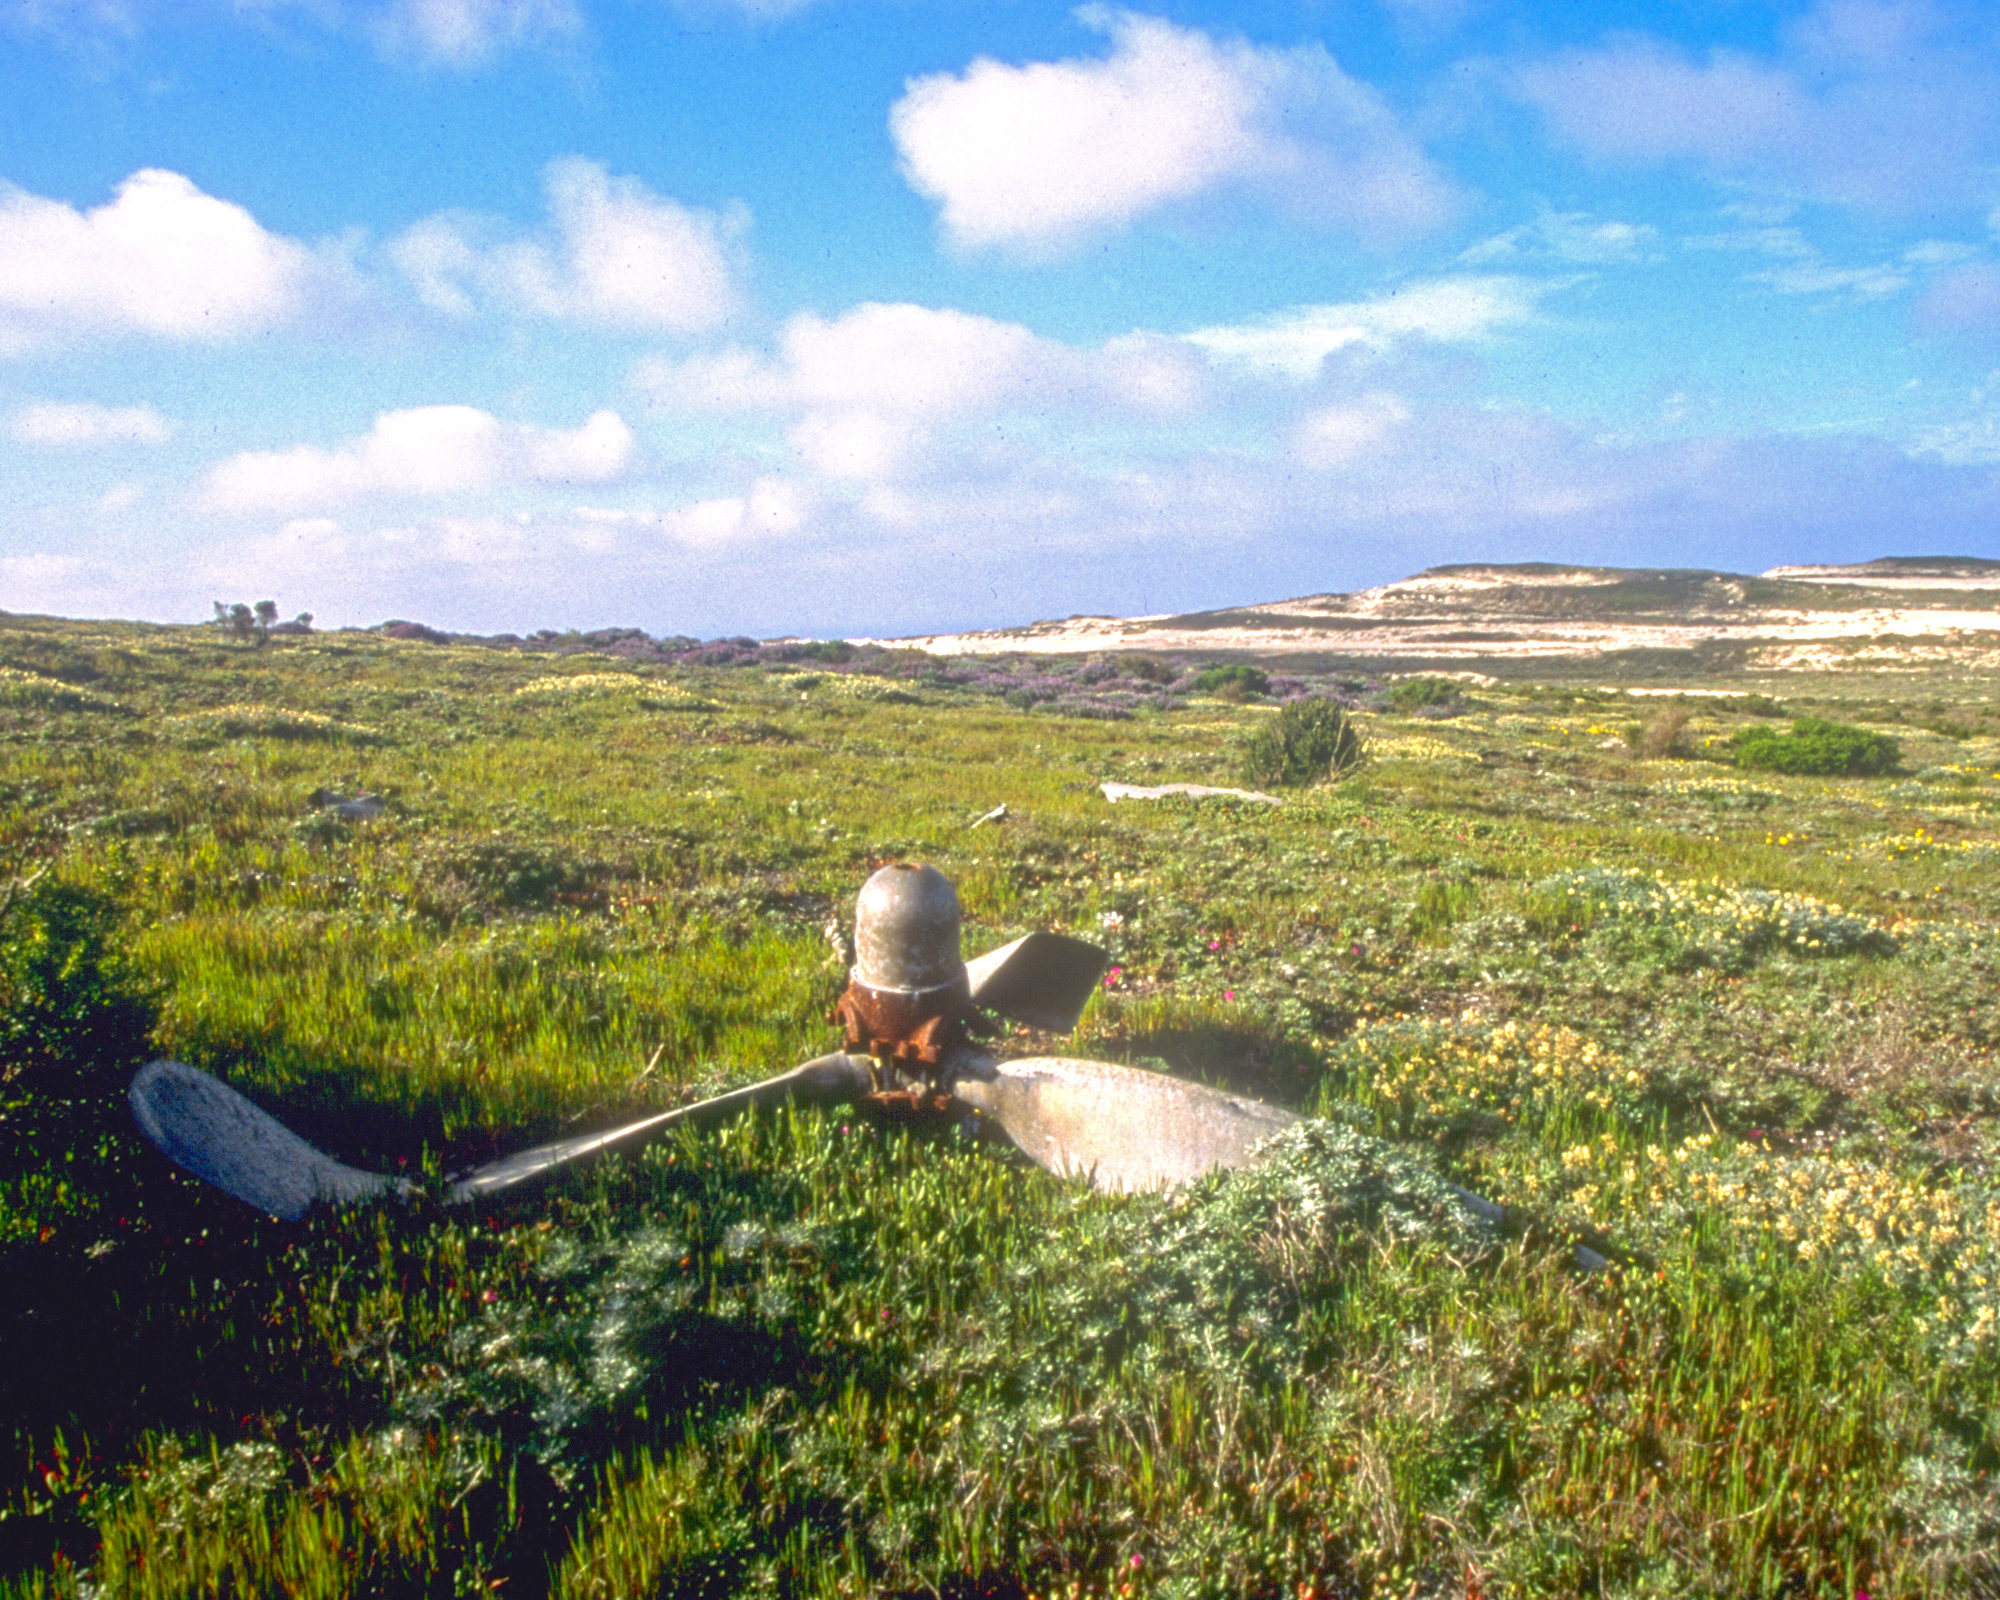 Plane wreckage including prop in field of green vegetation with low hill in background.